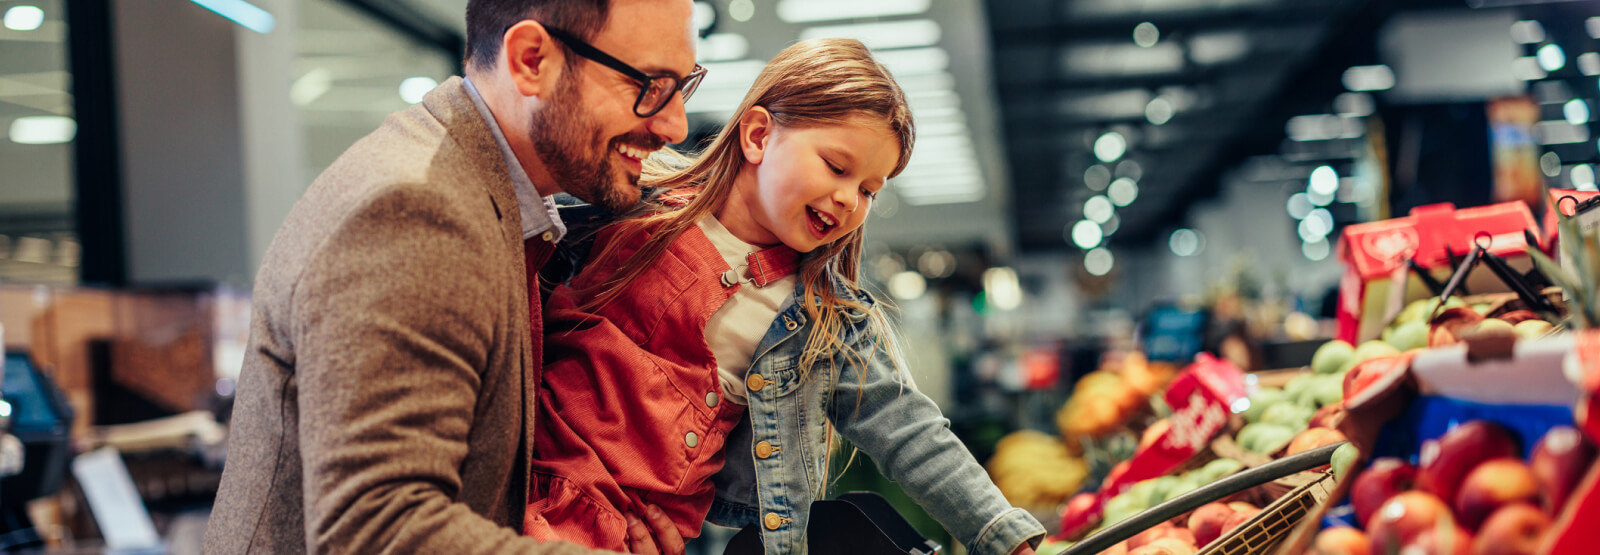 Father and daughter smiling at grocery store while picking up produce